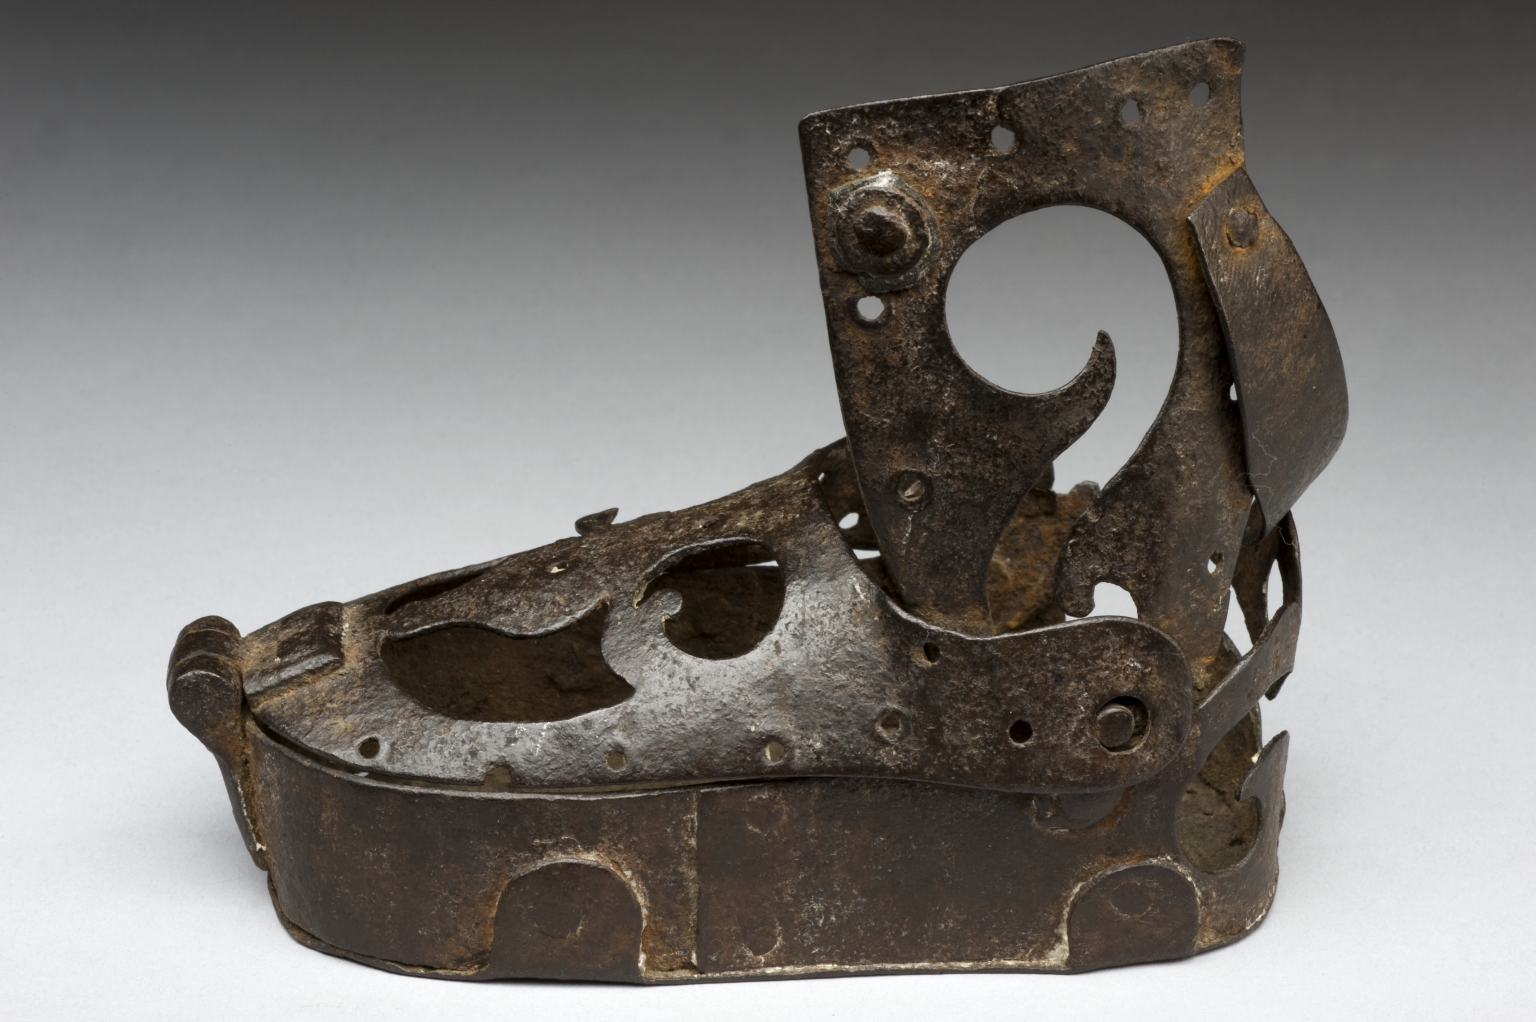 Child's ankle support (orthopedic shoe), Italy, 1501-1600.